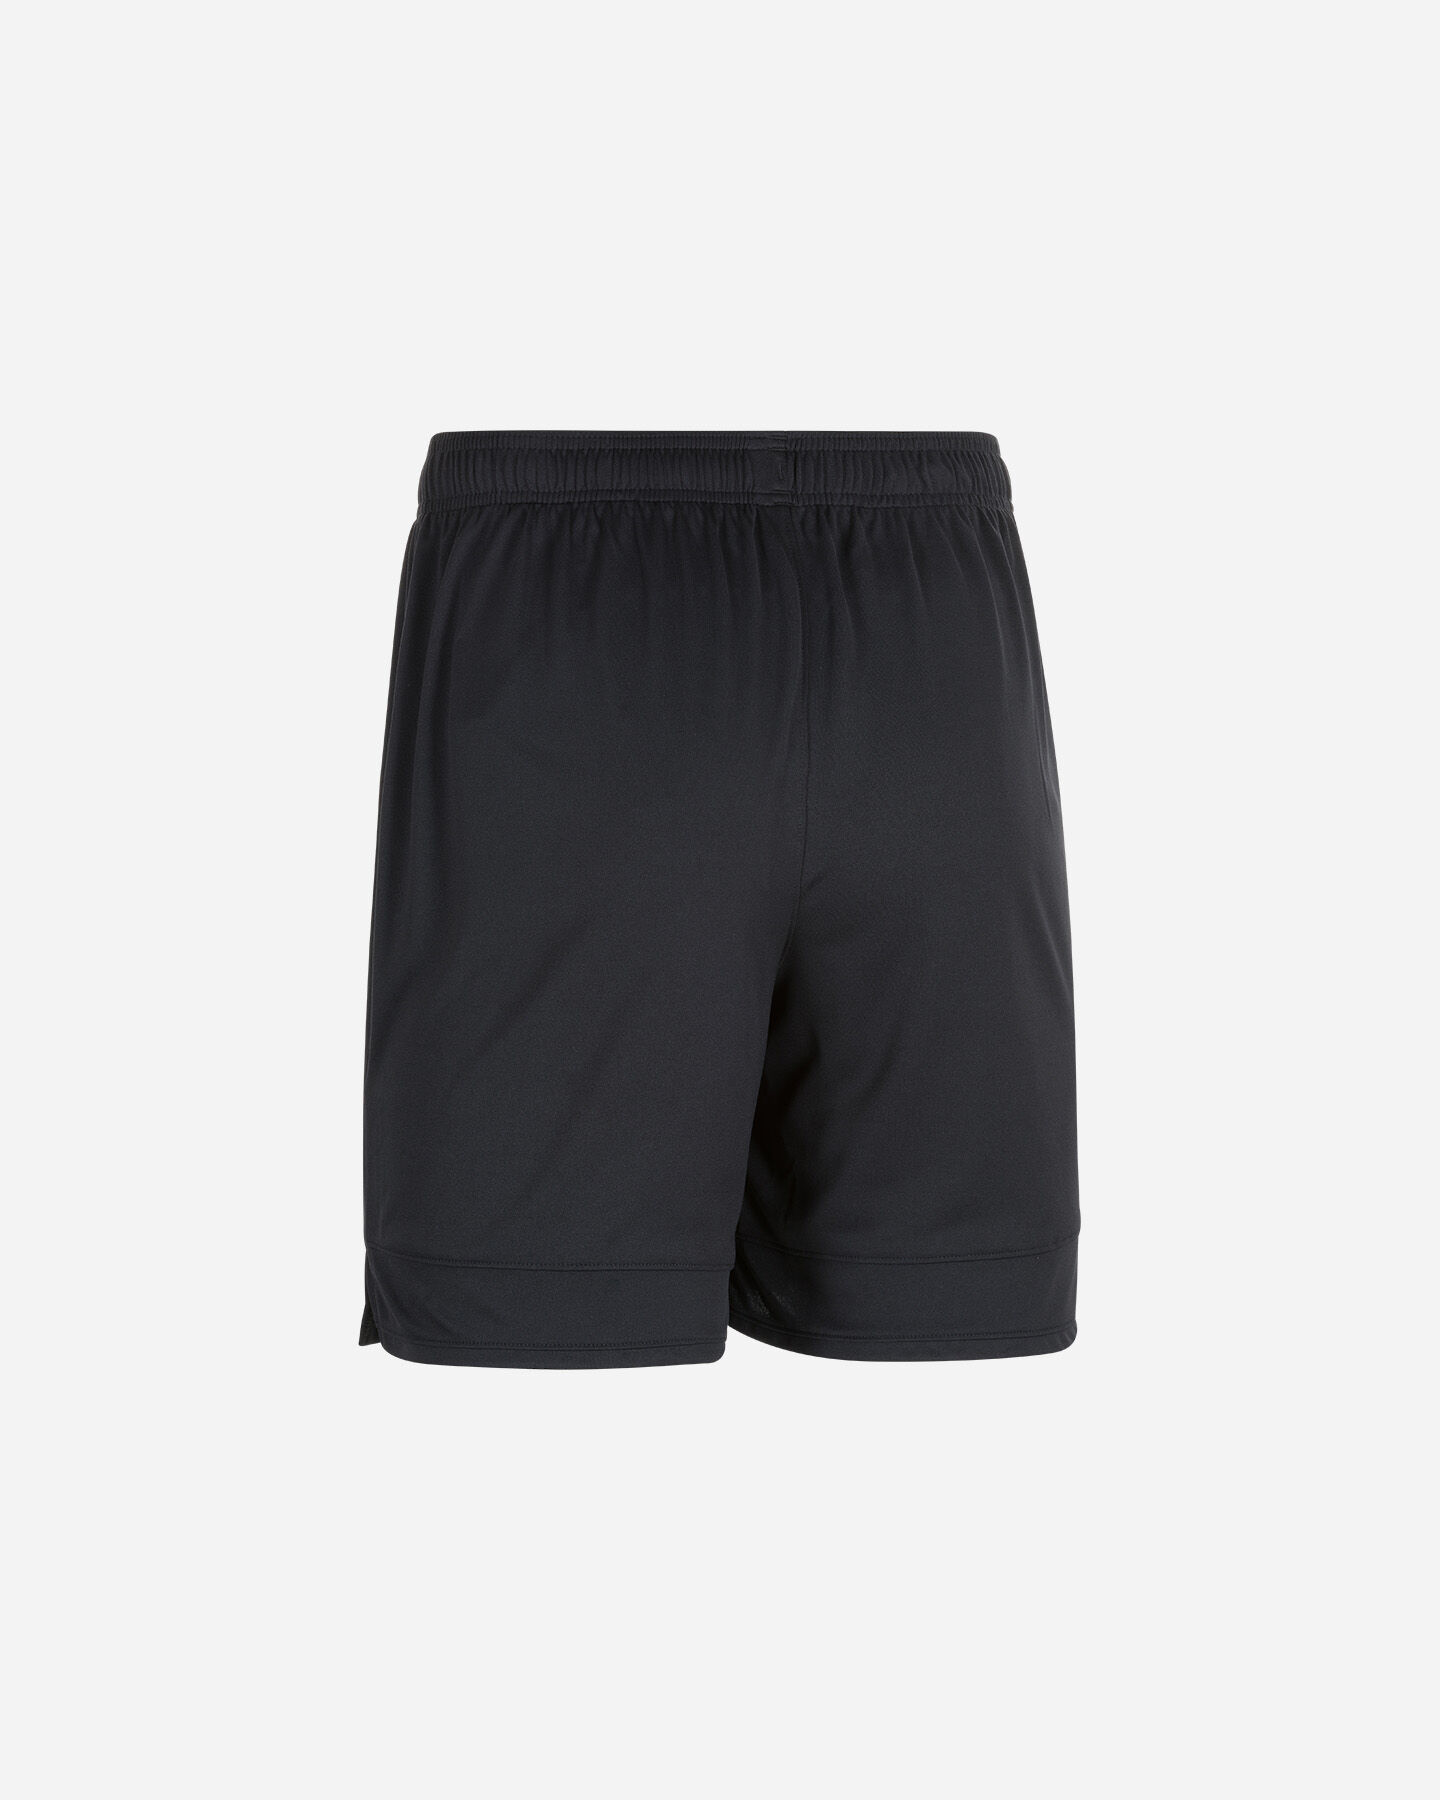  Pantalone training UNDER ARMOUR CHALLENGER KNIT M S5168553|0001|SM scatto 1